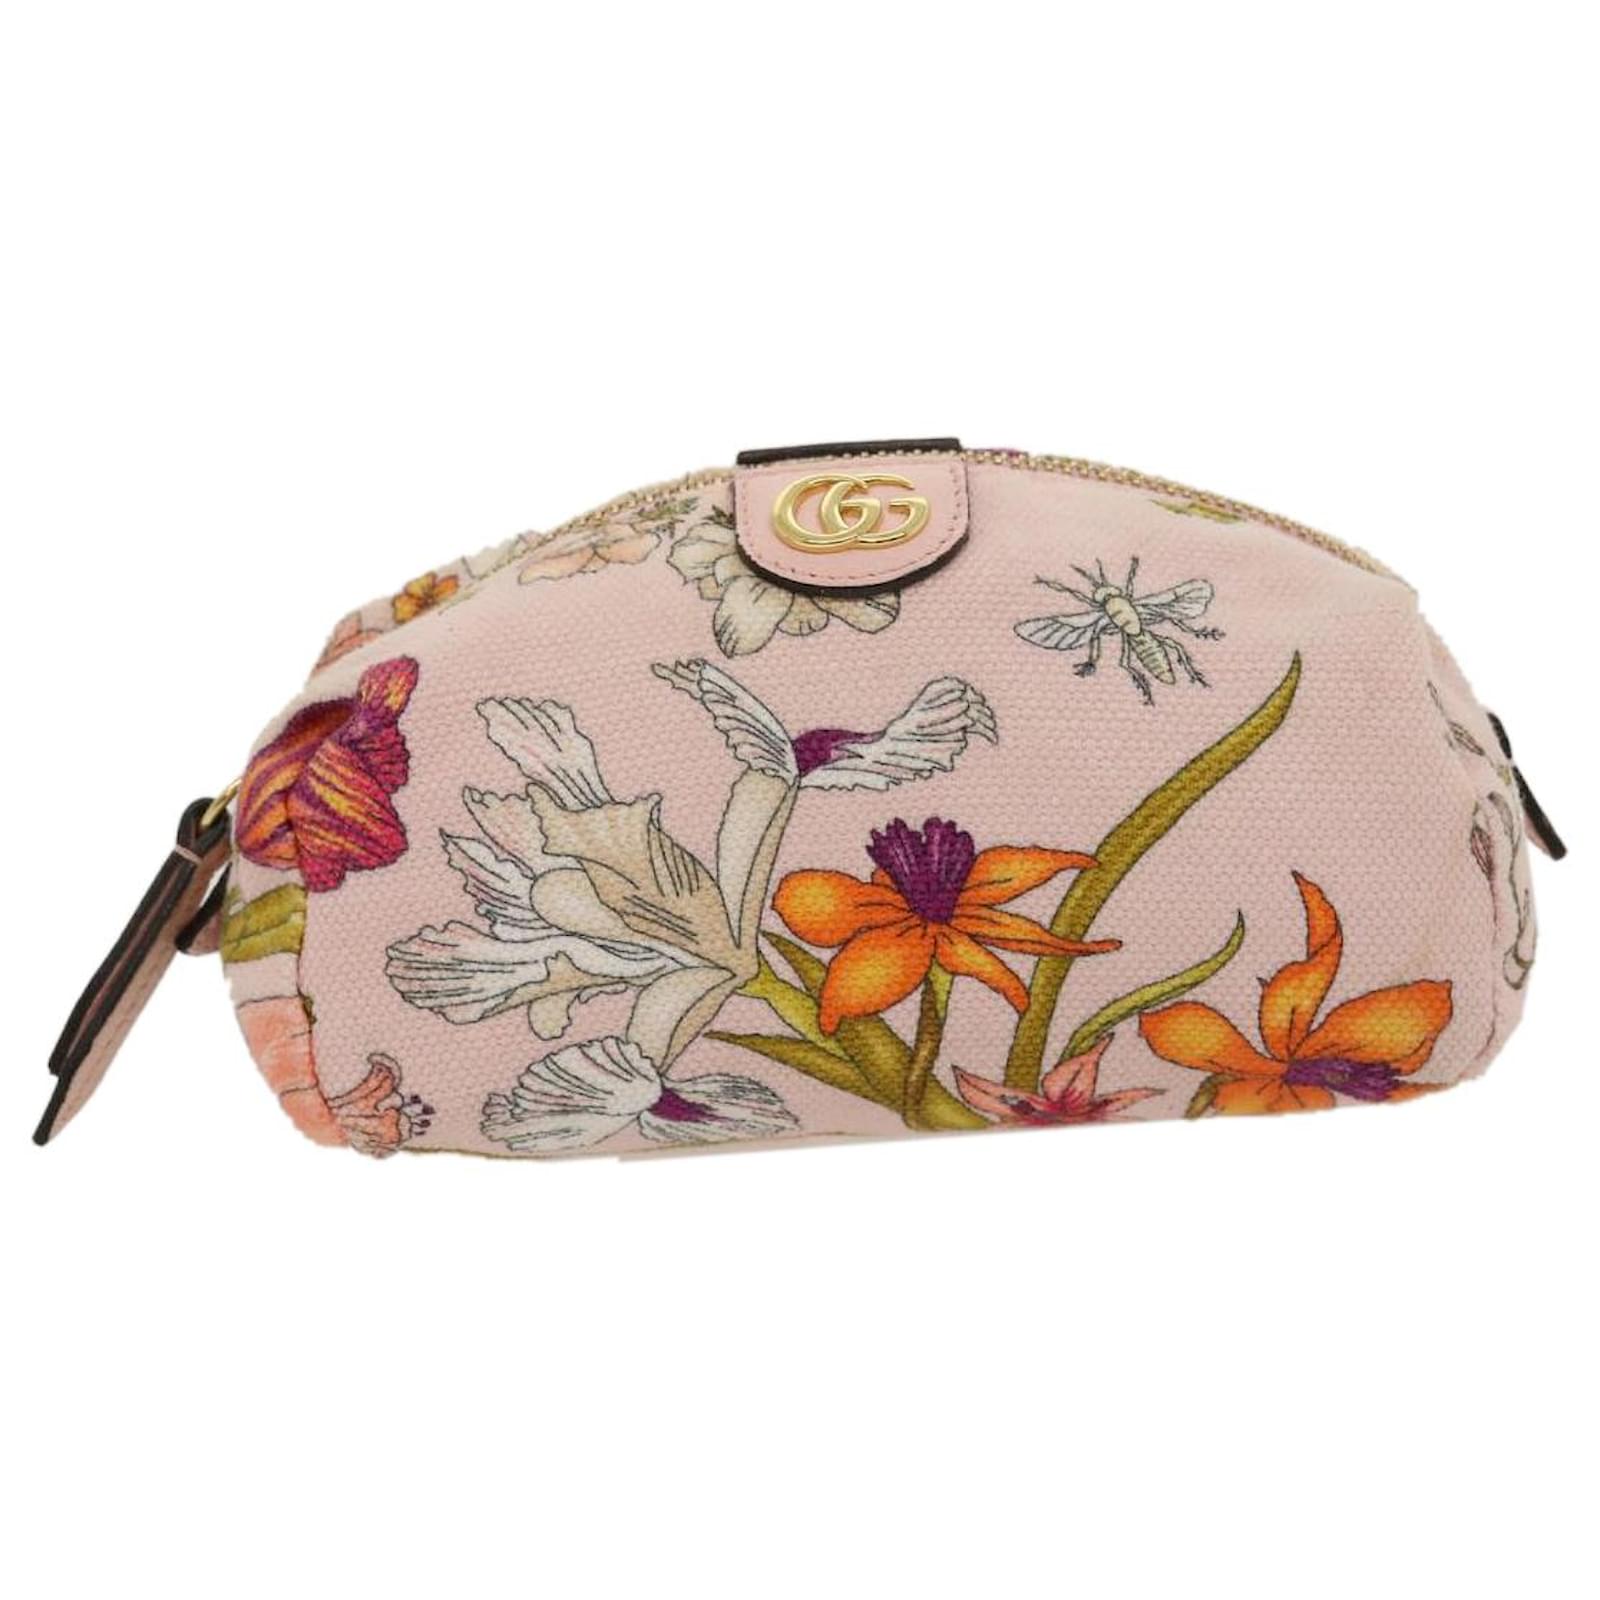 GUCCI Flora Flower Pink Cosmetic Pouch Bag Canvas Japan Limited 577355 Auth